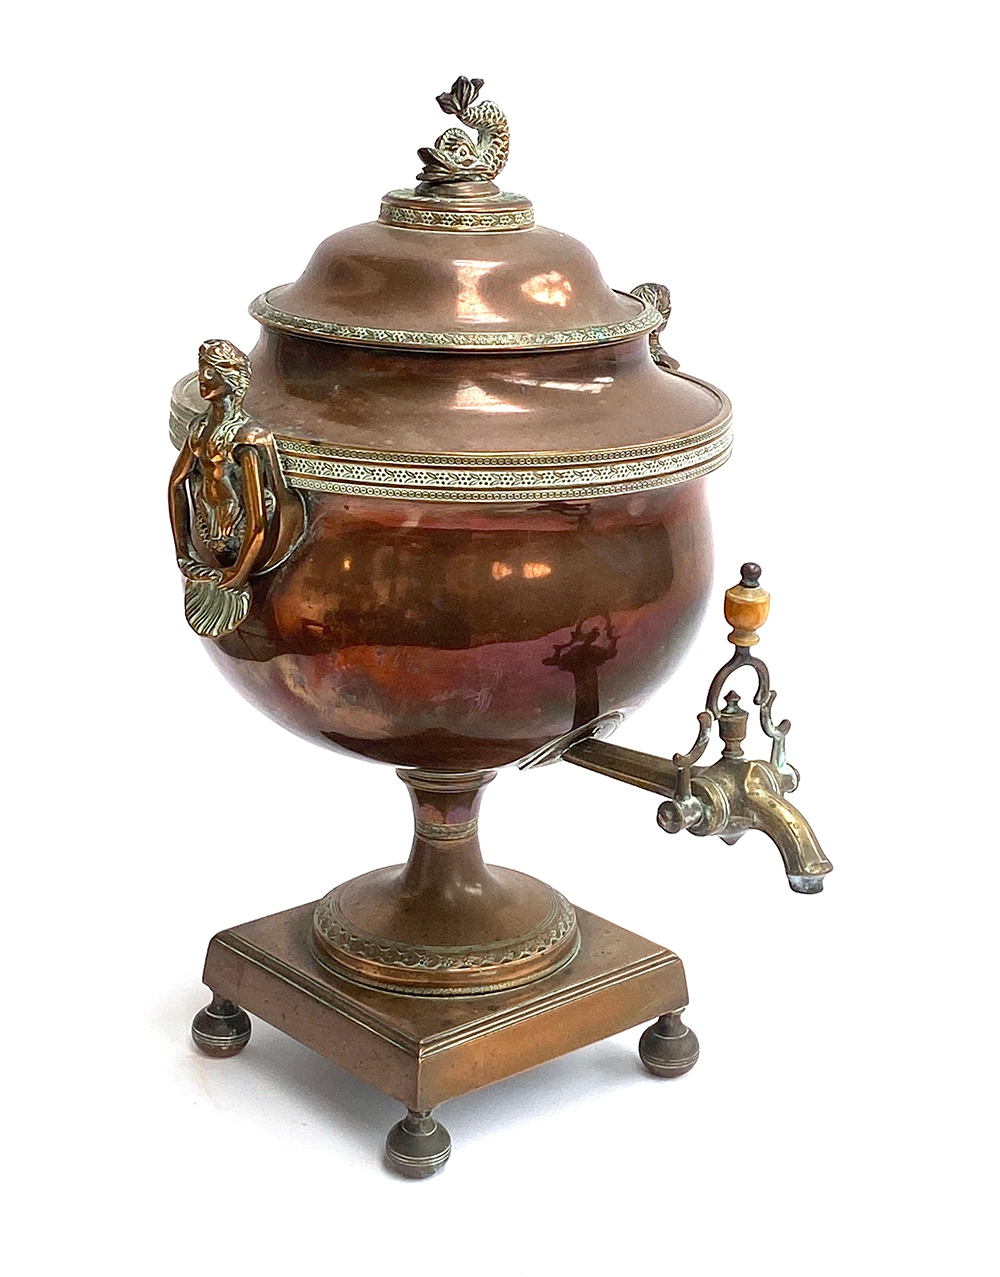 A 19th century copper and brass samovar with dolphin finial and mermaid handles, 37cmH